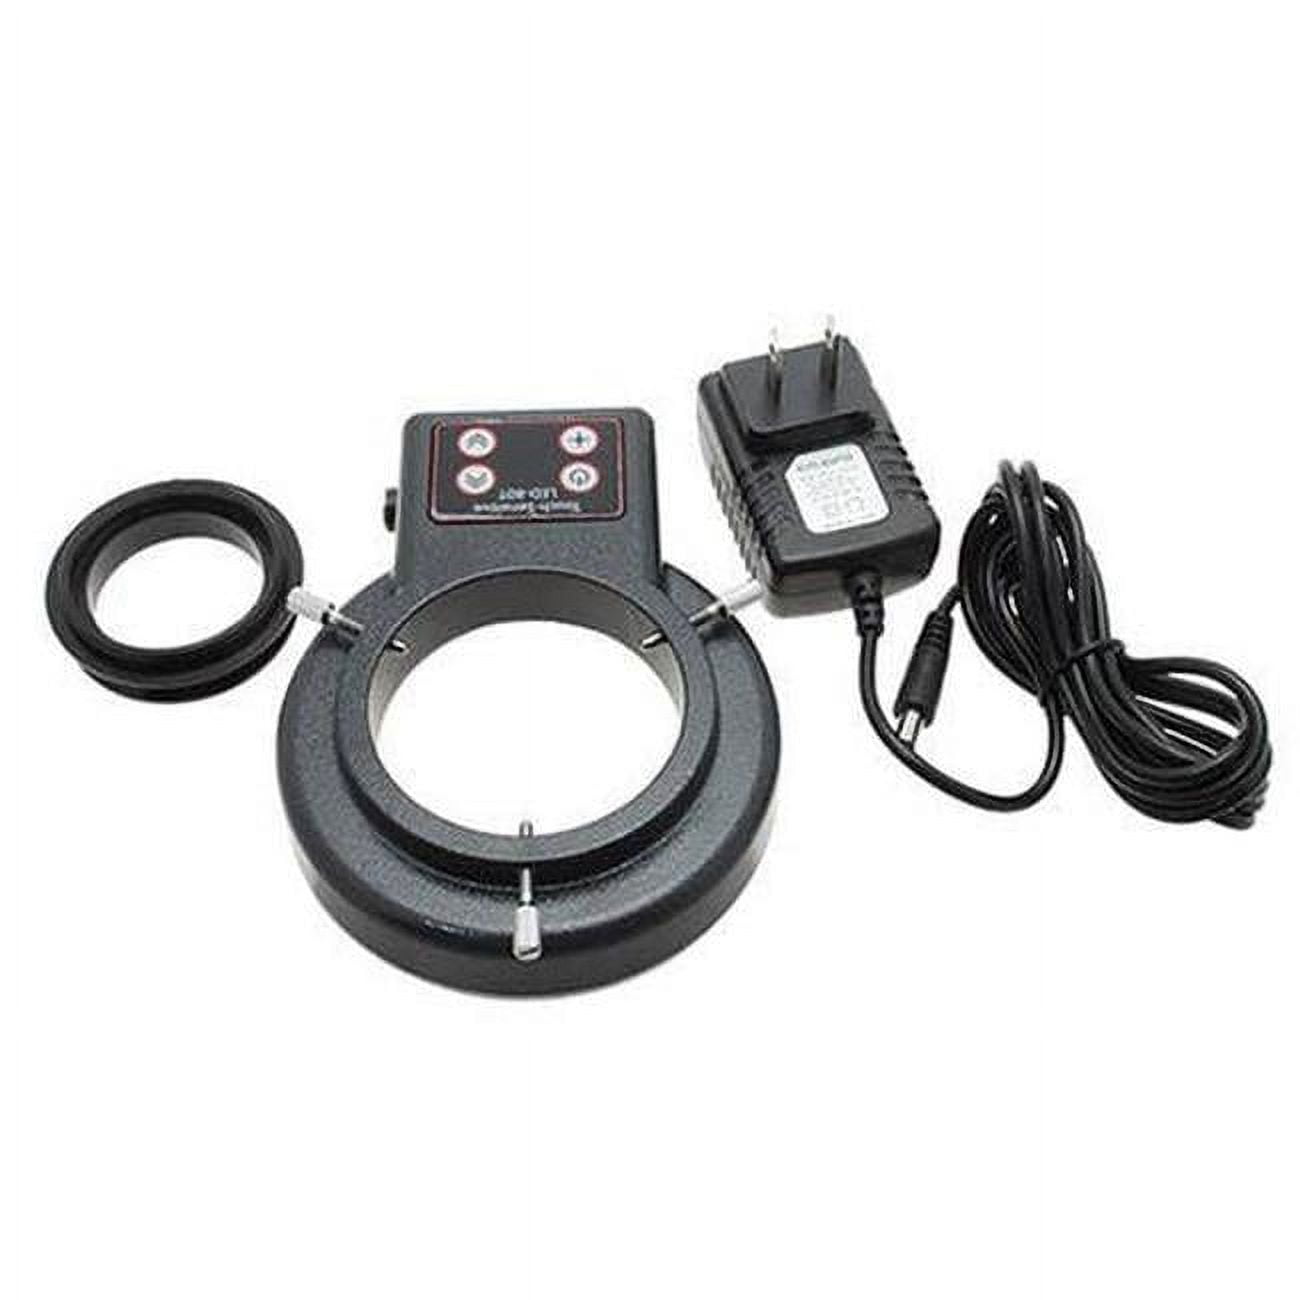 Picture of Aven 26200B-210 80 LED Ring Light with Touch Control